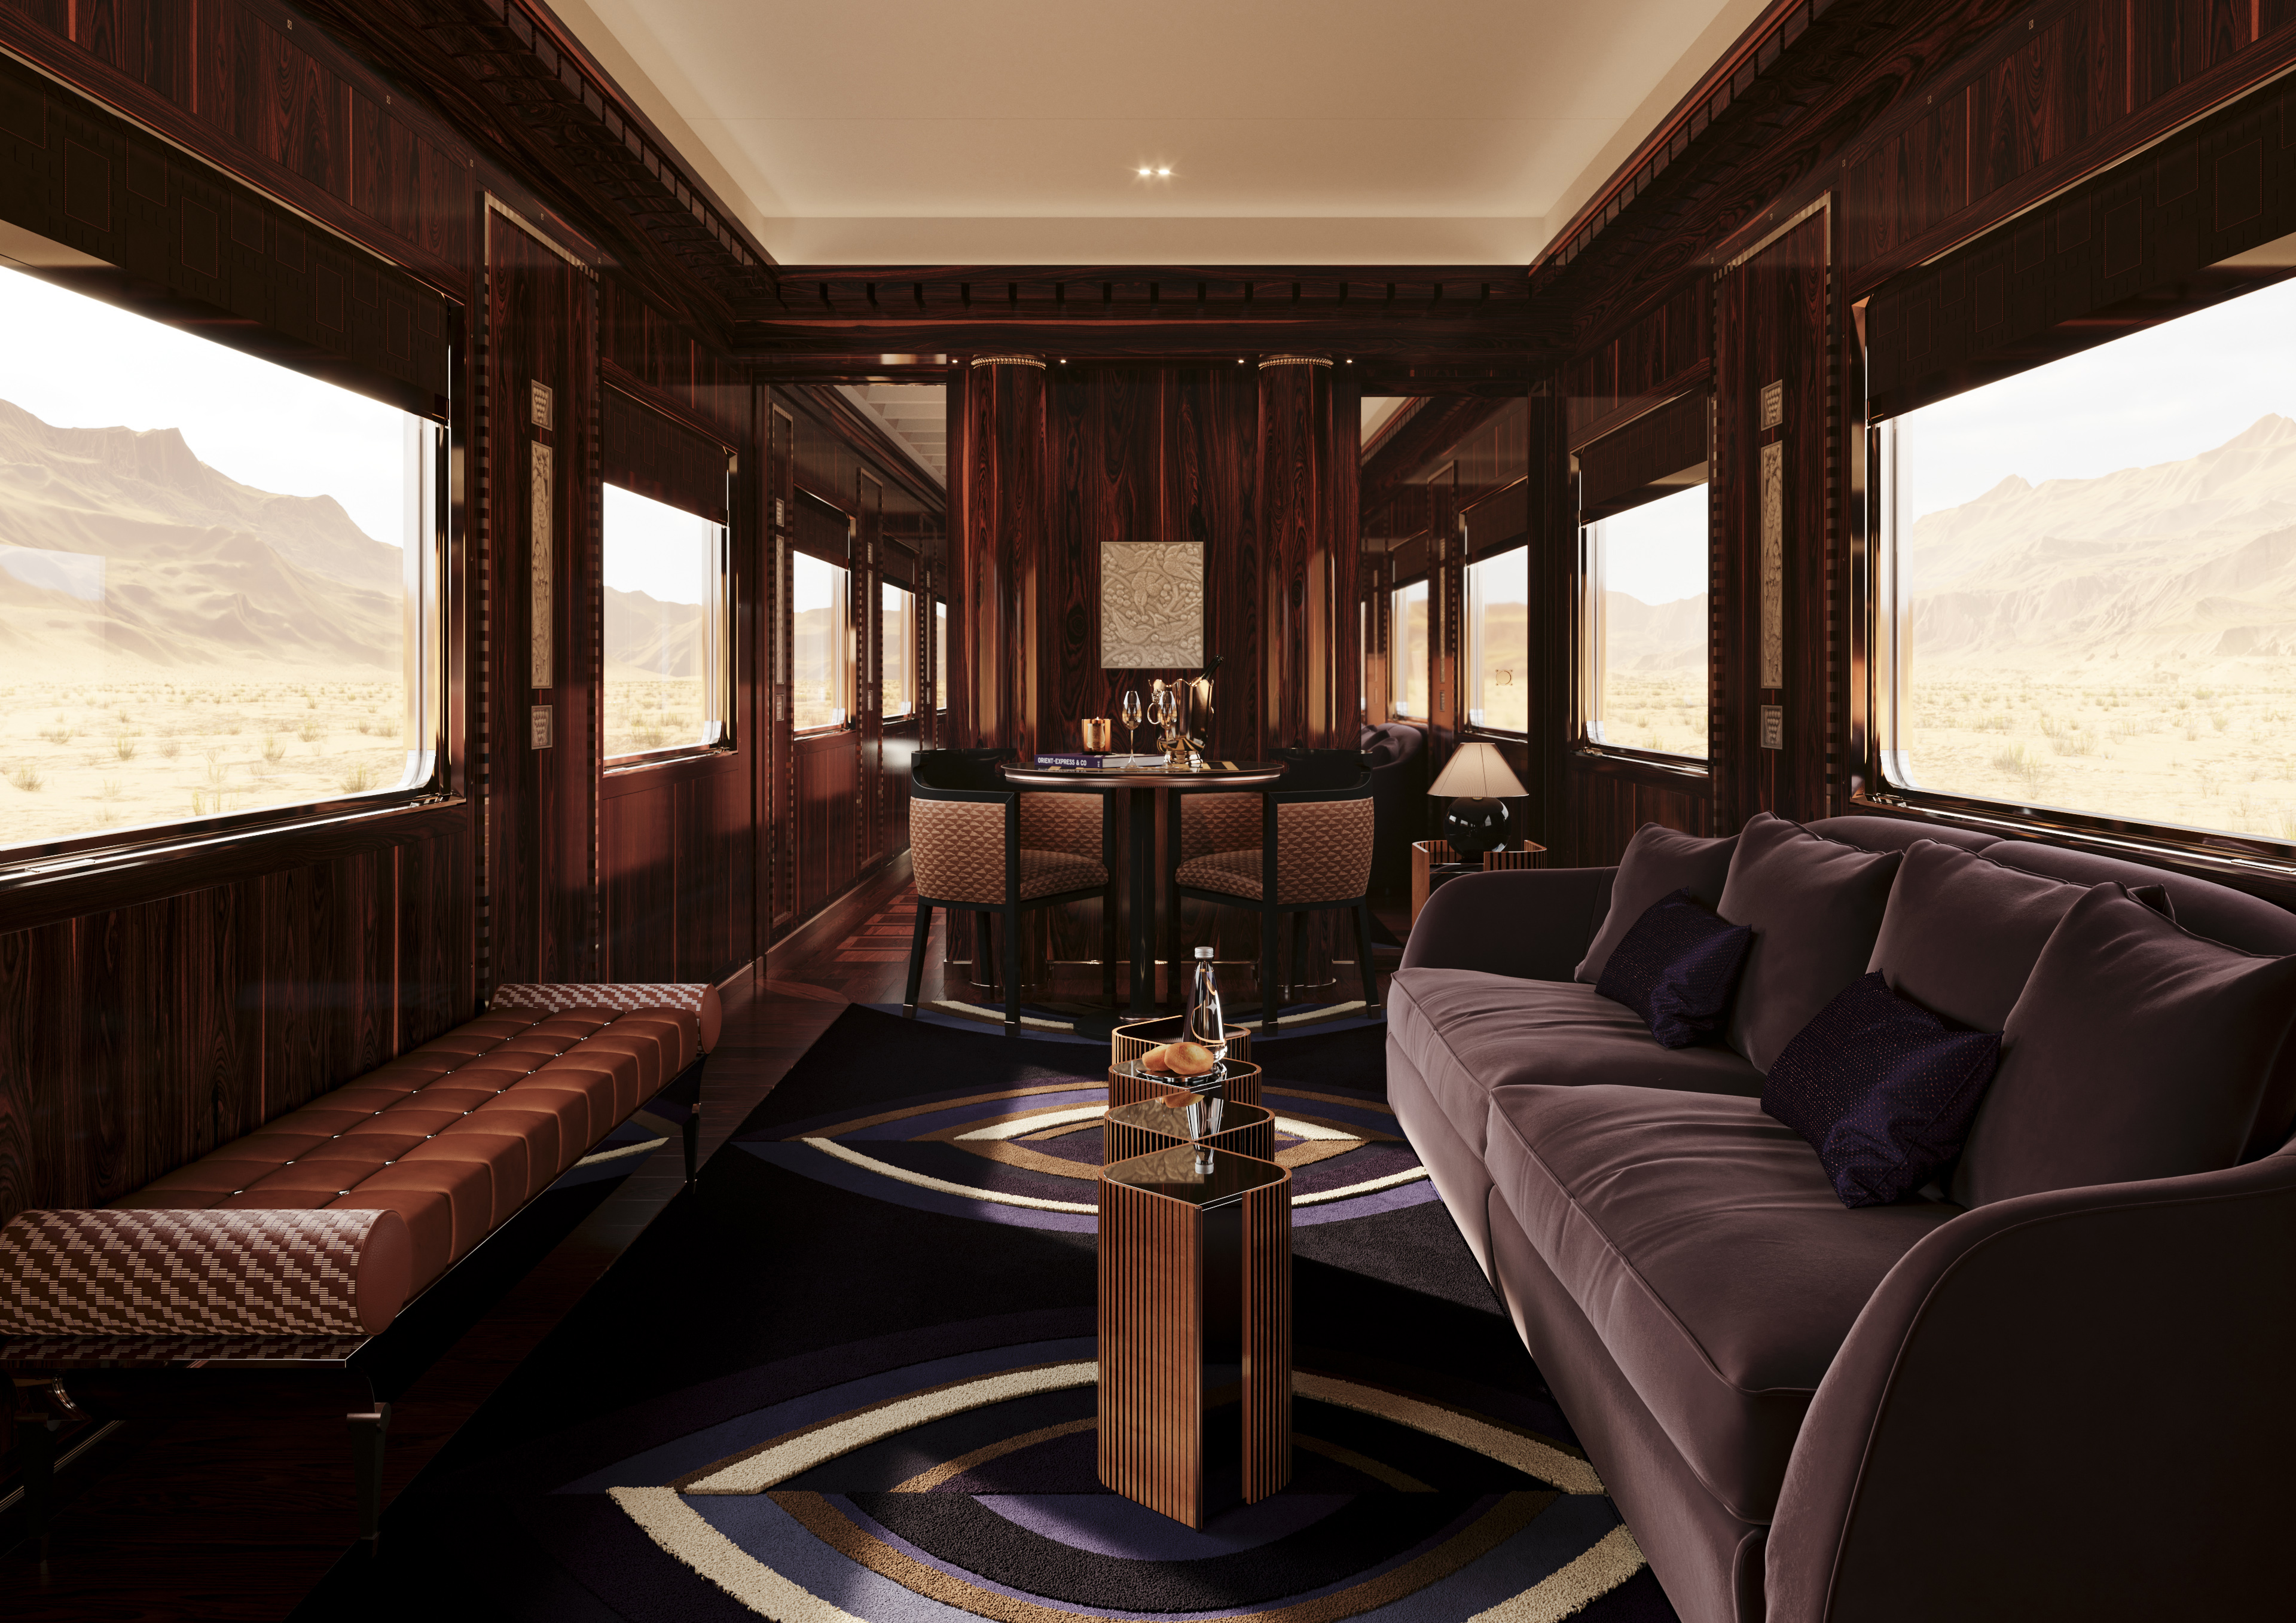 All aboard: Historical Orient Express train reaches Istanbul